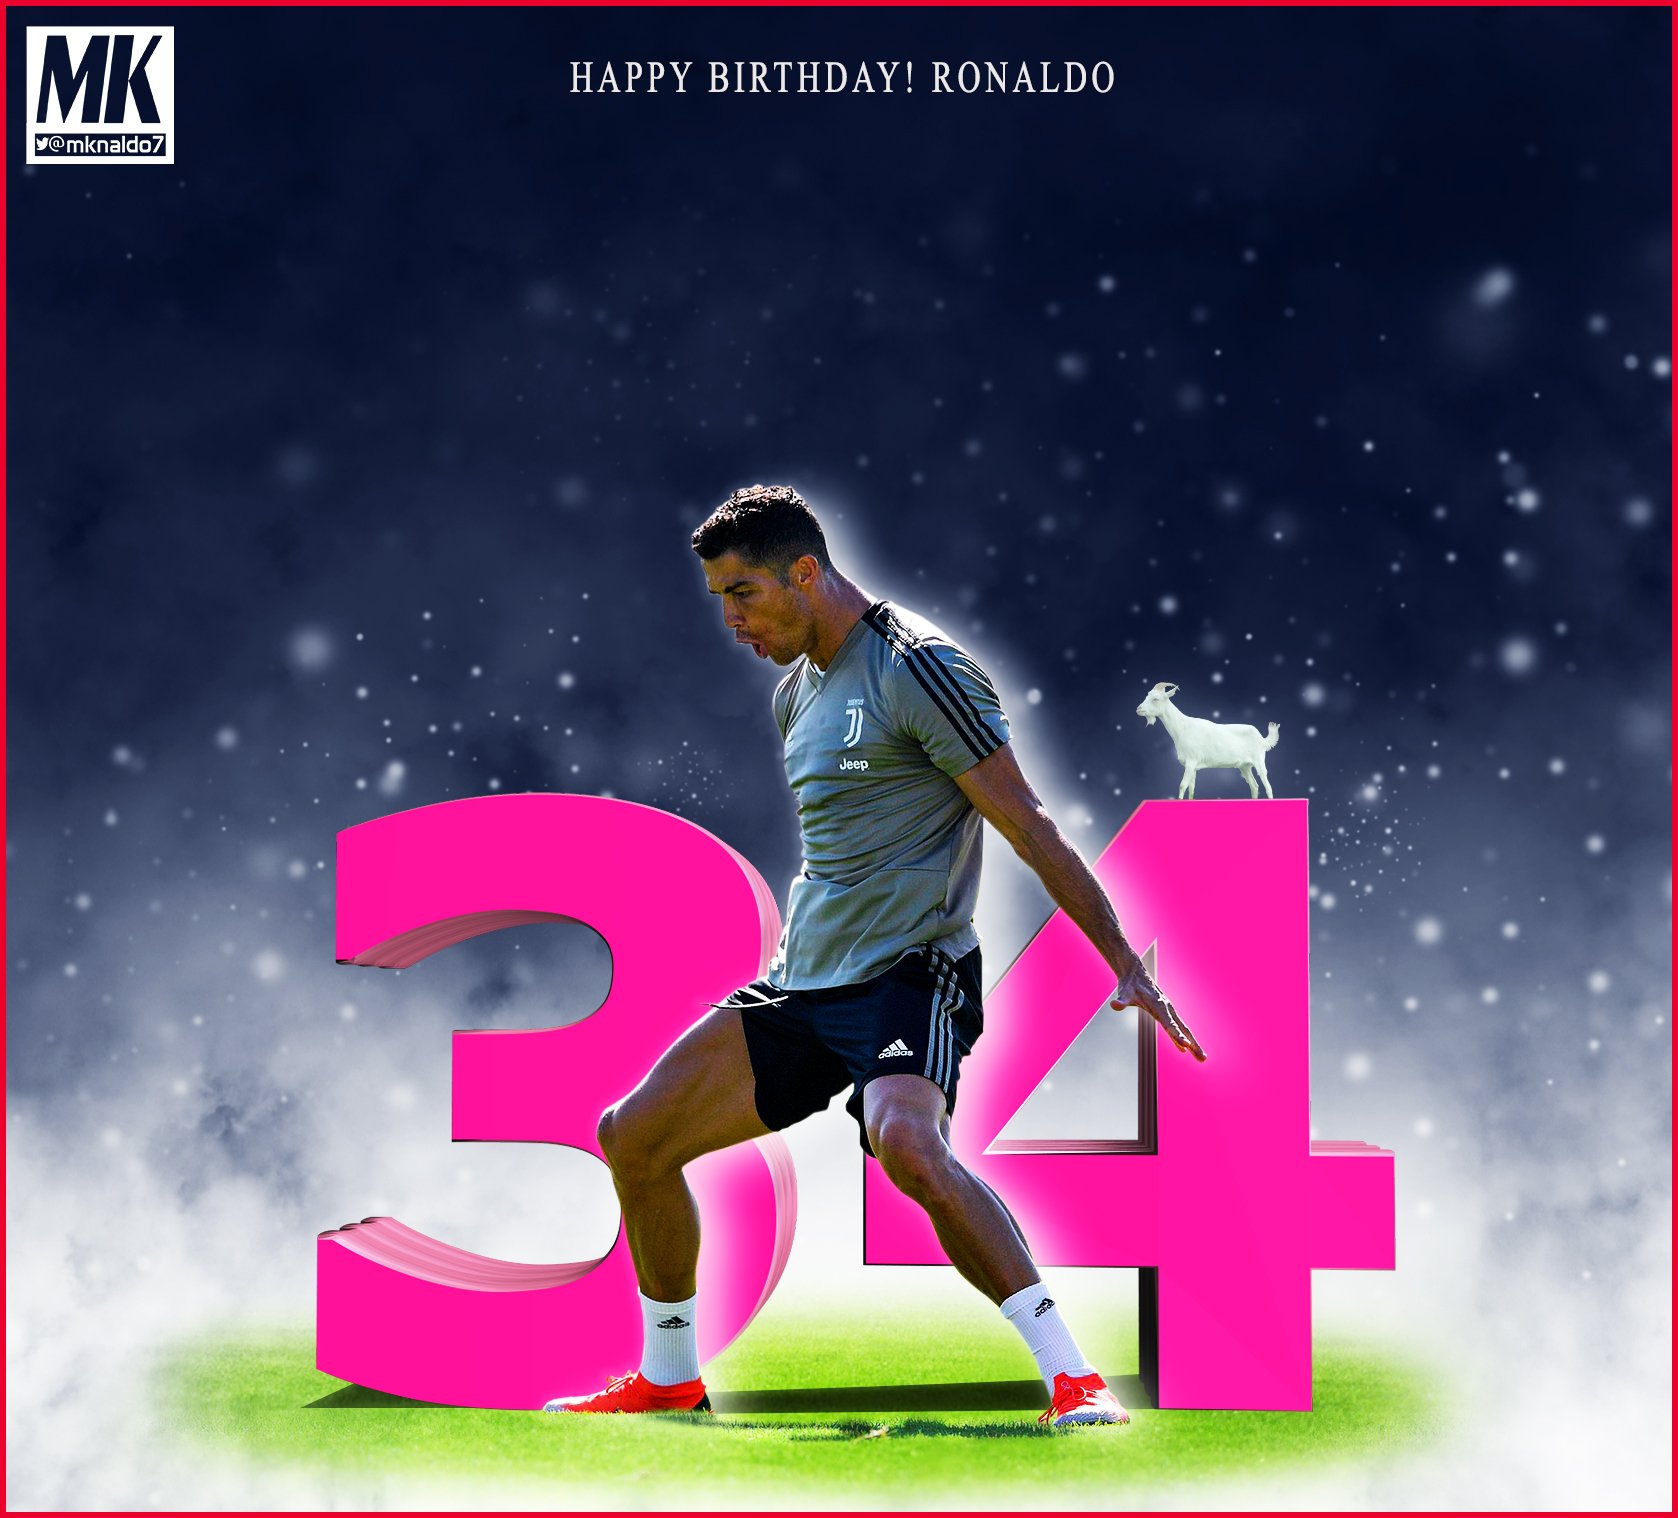 Cristiano Ronaldo turns 34.

Happy Birthday, May you accomplish the challenges lies ahead of you. 